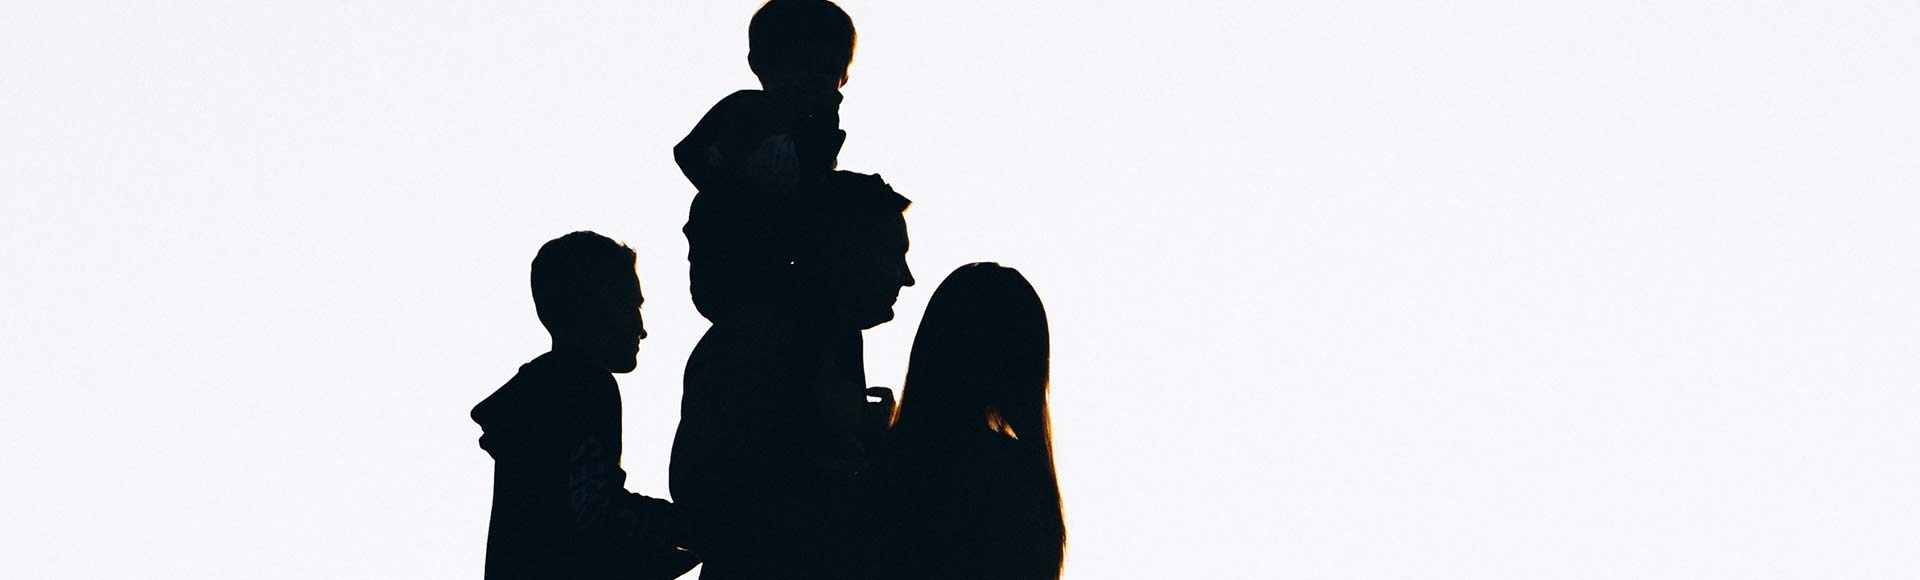 silhouette of a family in the sunset 